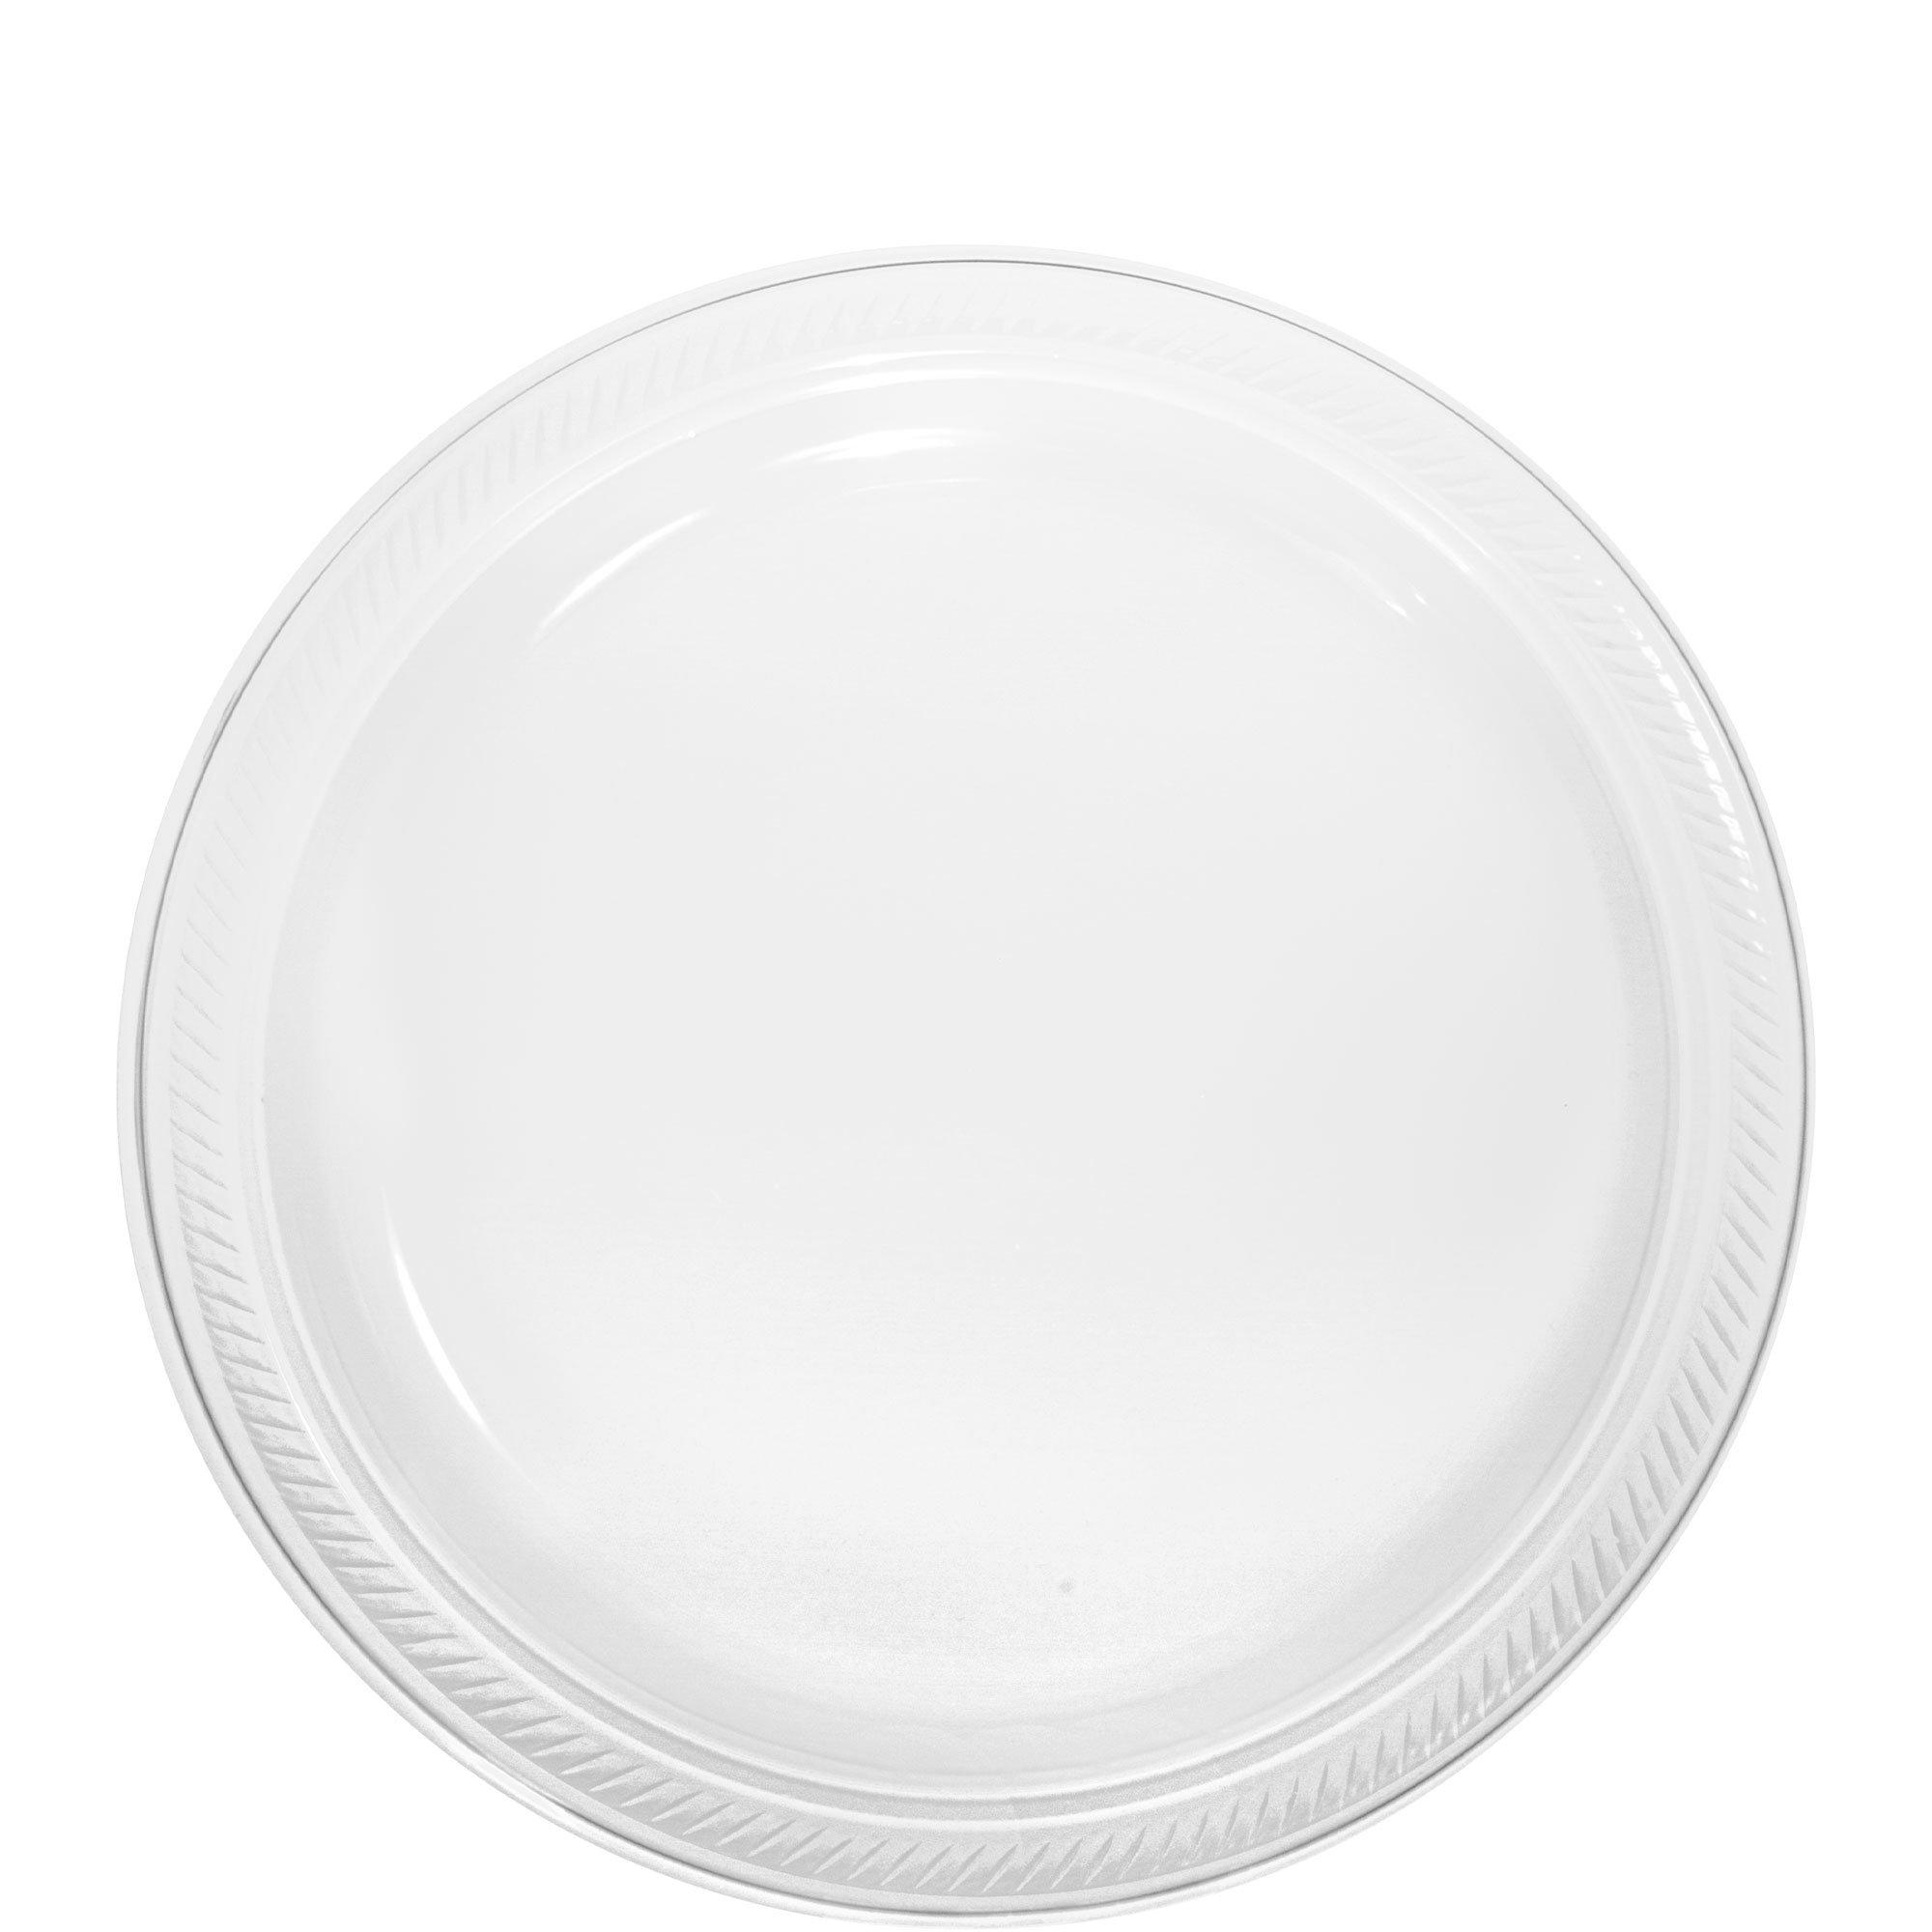 50 Count Disposable Paper Plates, 7 inch Party Dessert Plates